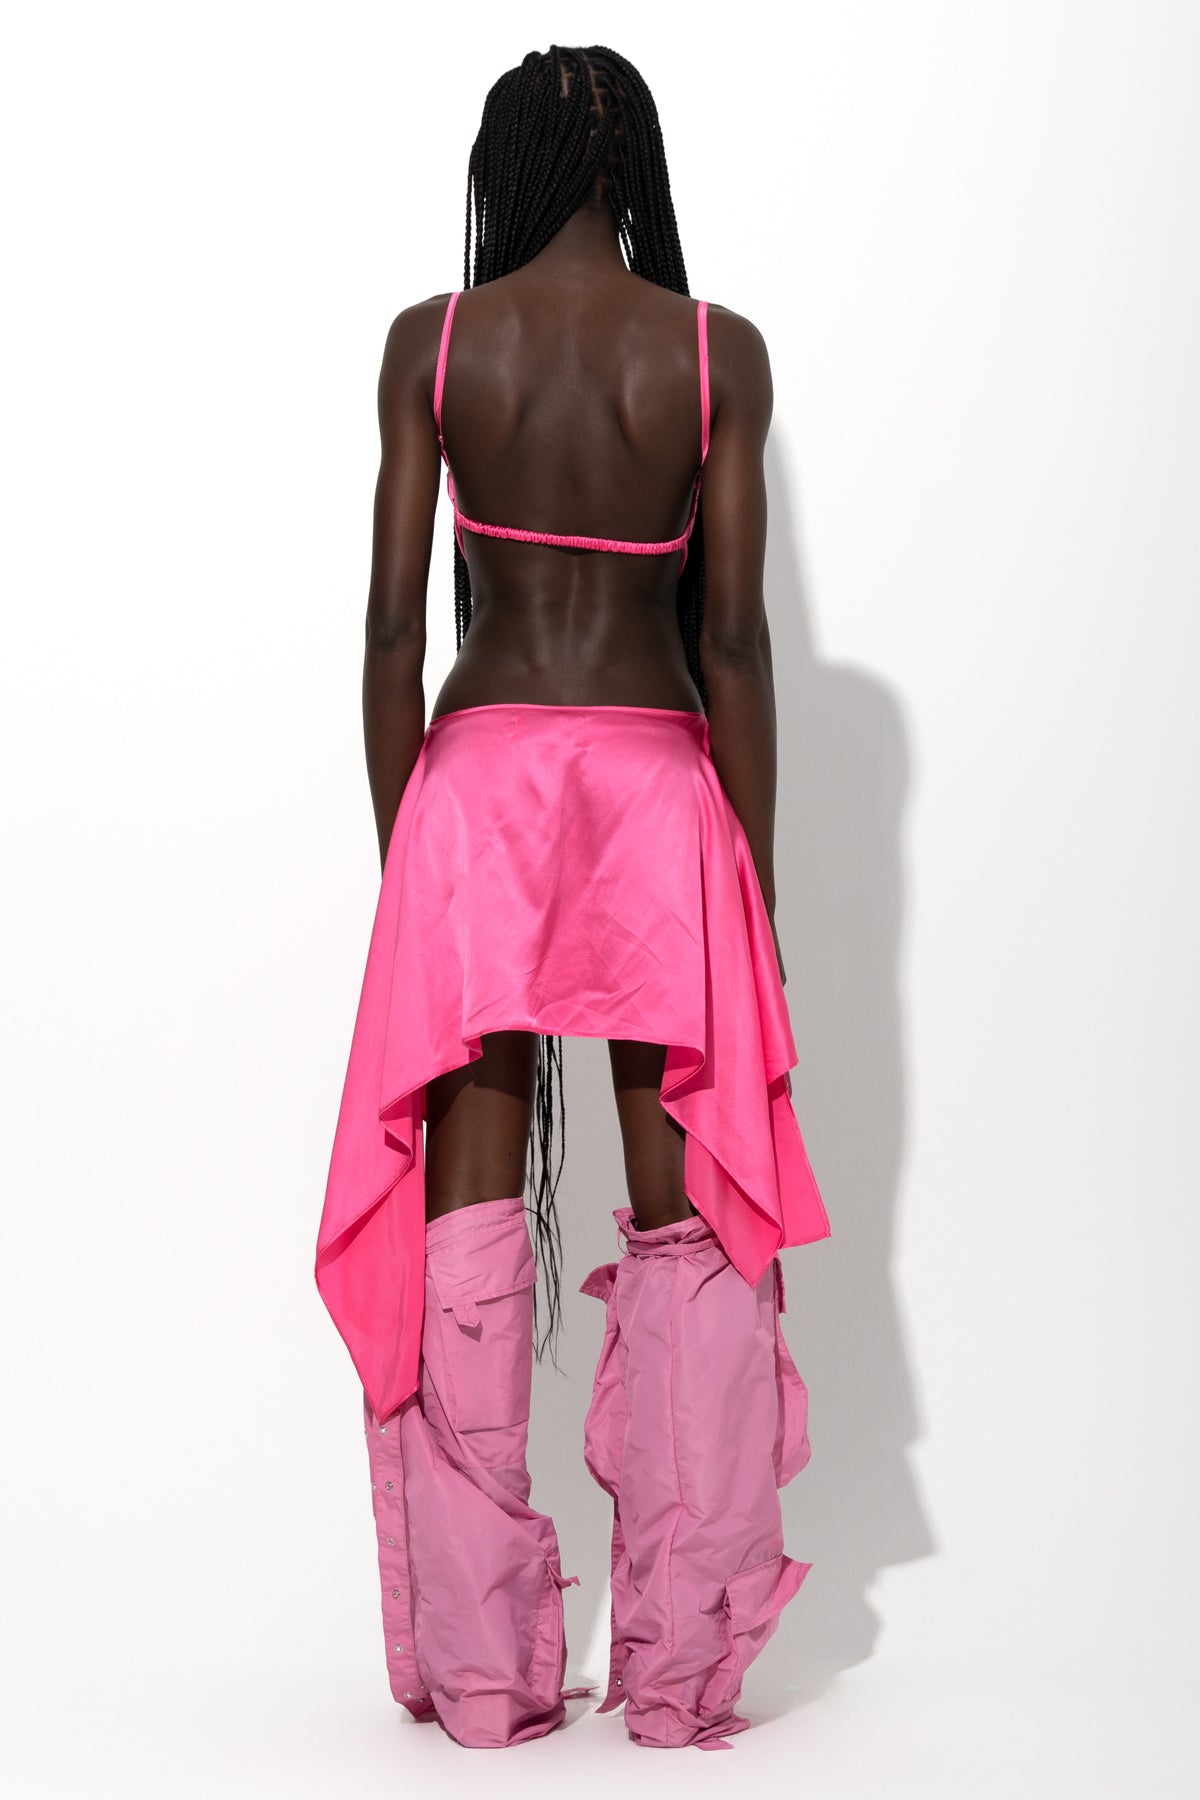 PINK SILK CUT OUT DRESS WITH OPEN BACK marques almeida